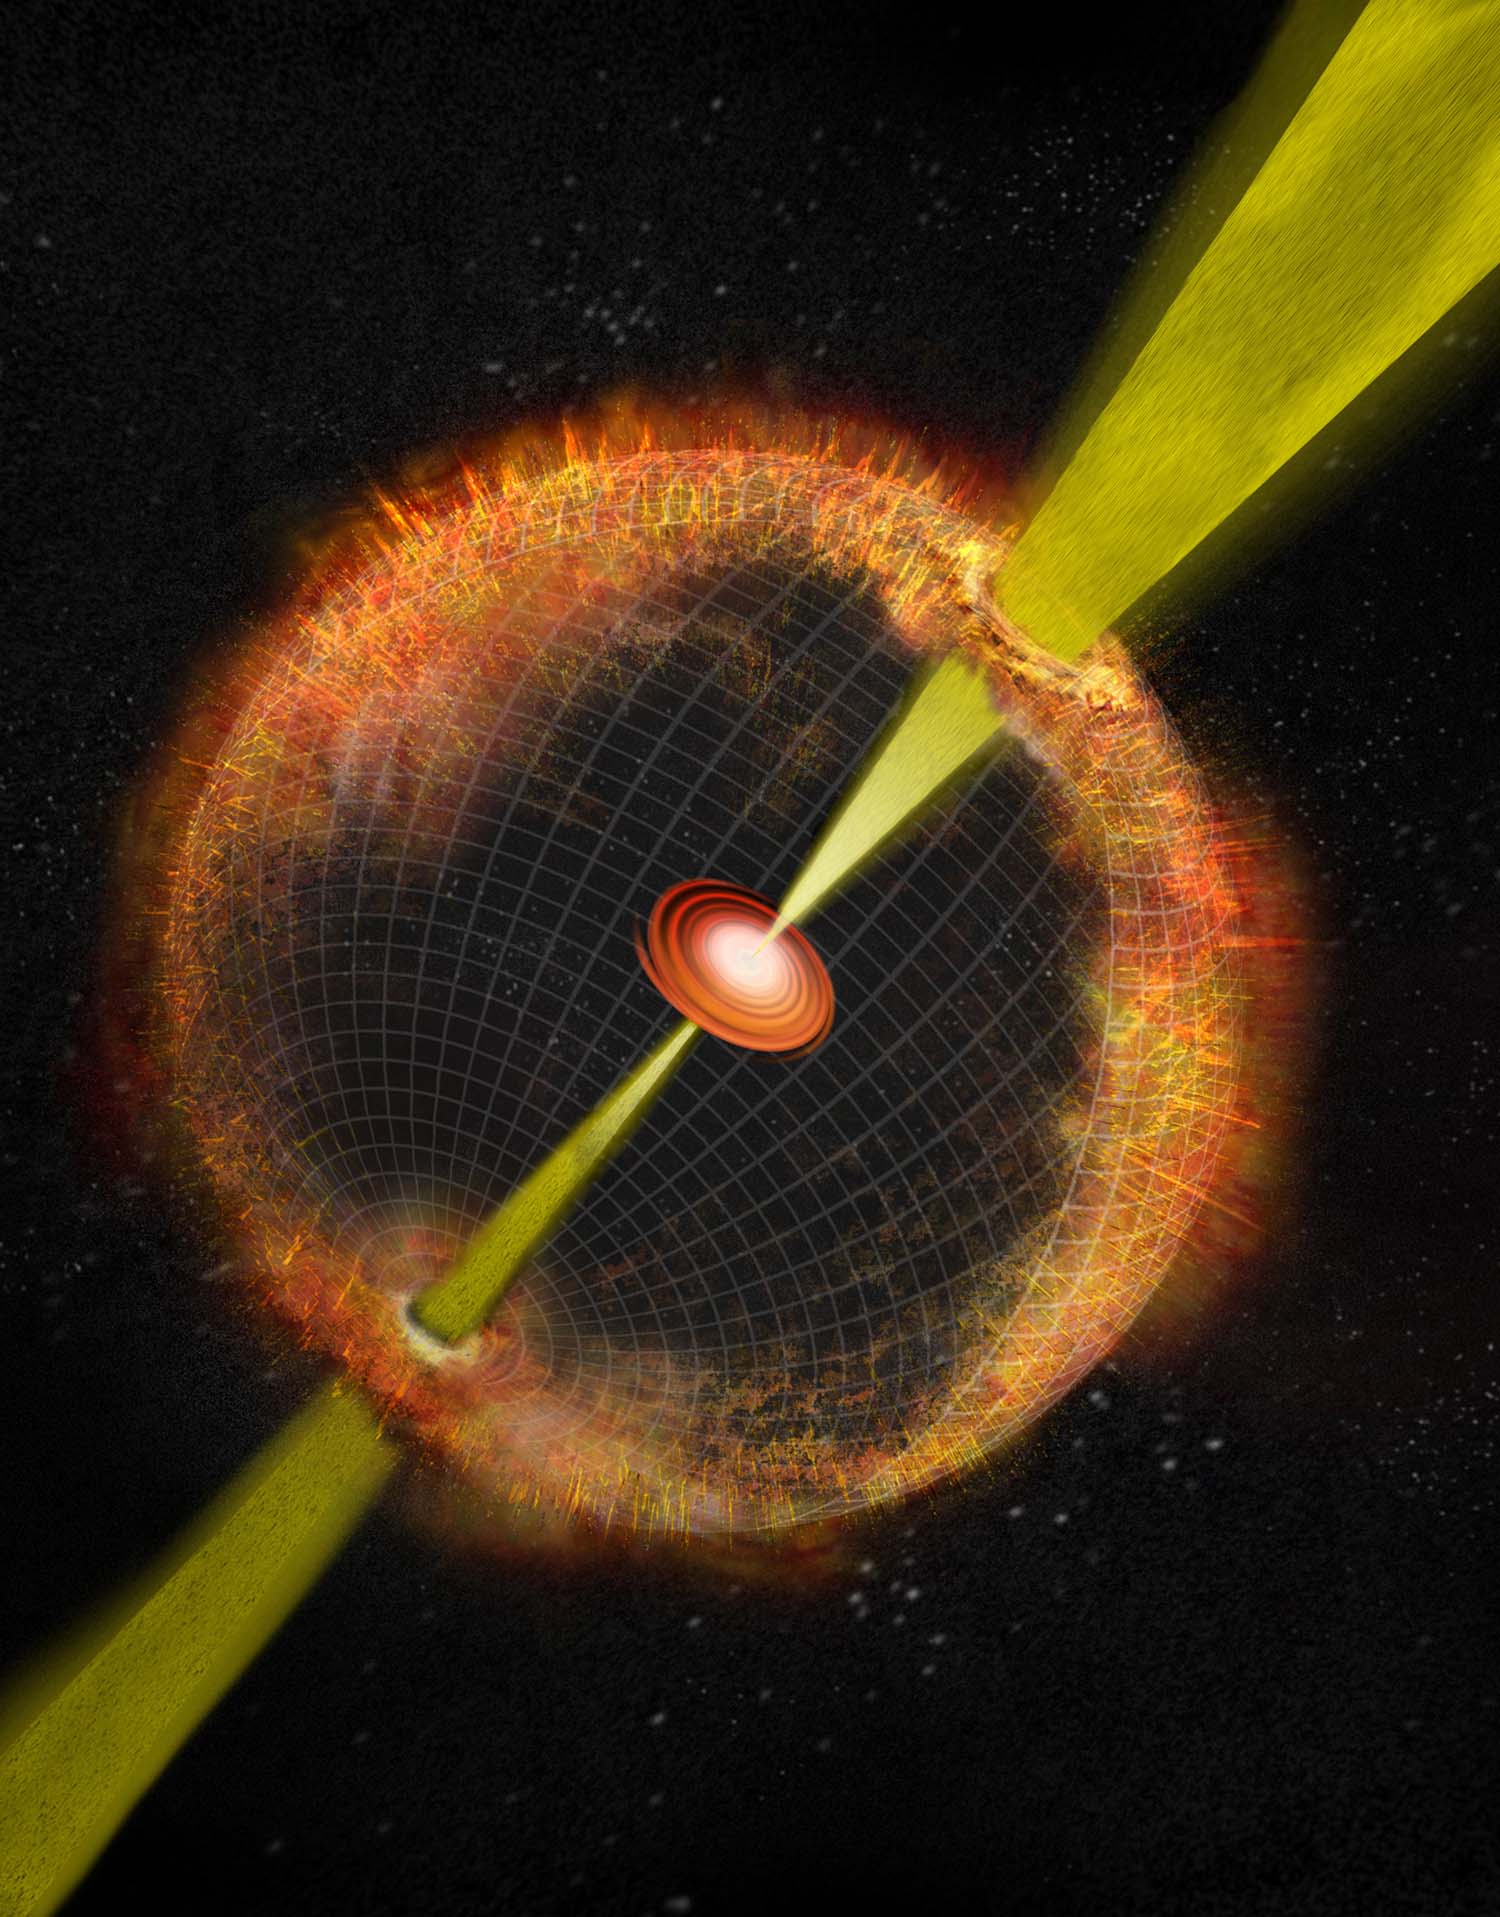 Smithsonian Insider – Astronomers Find Rare Supernova by New Means